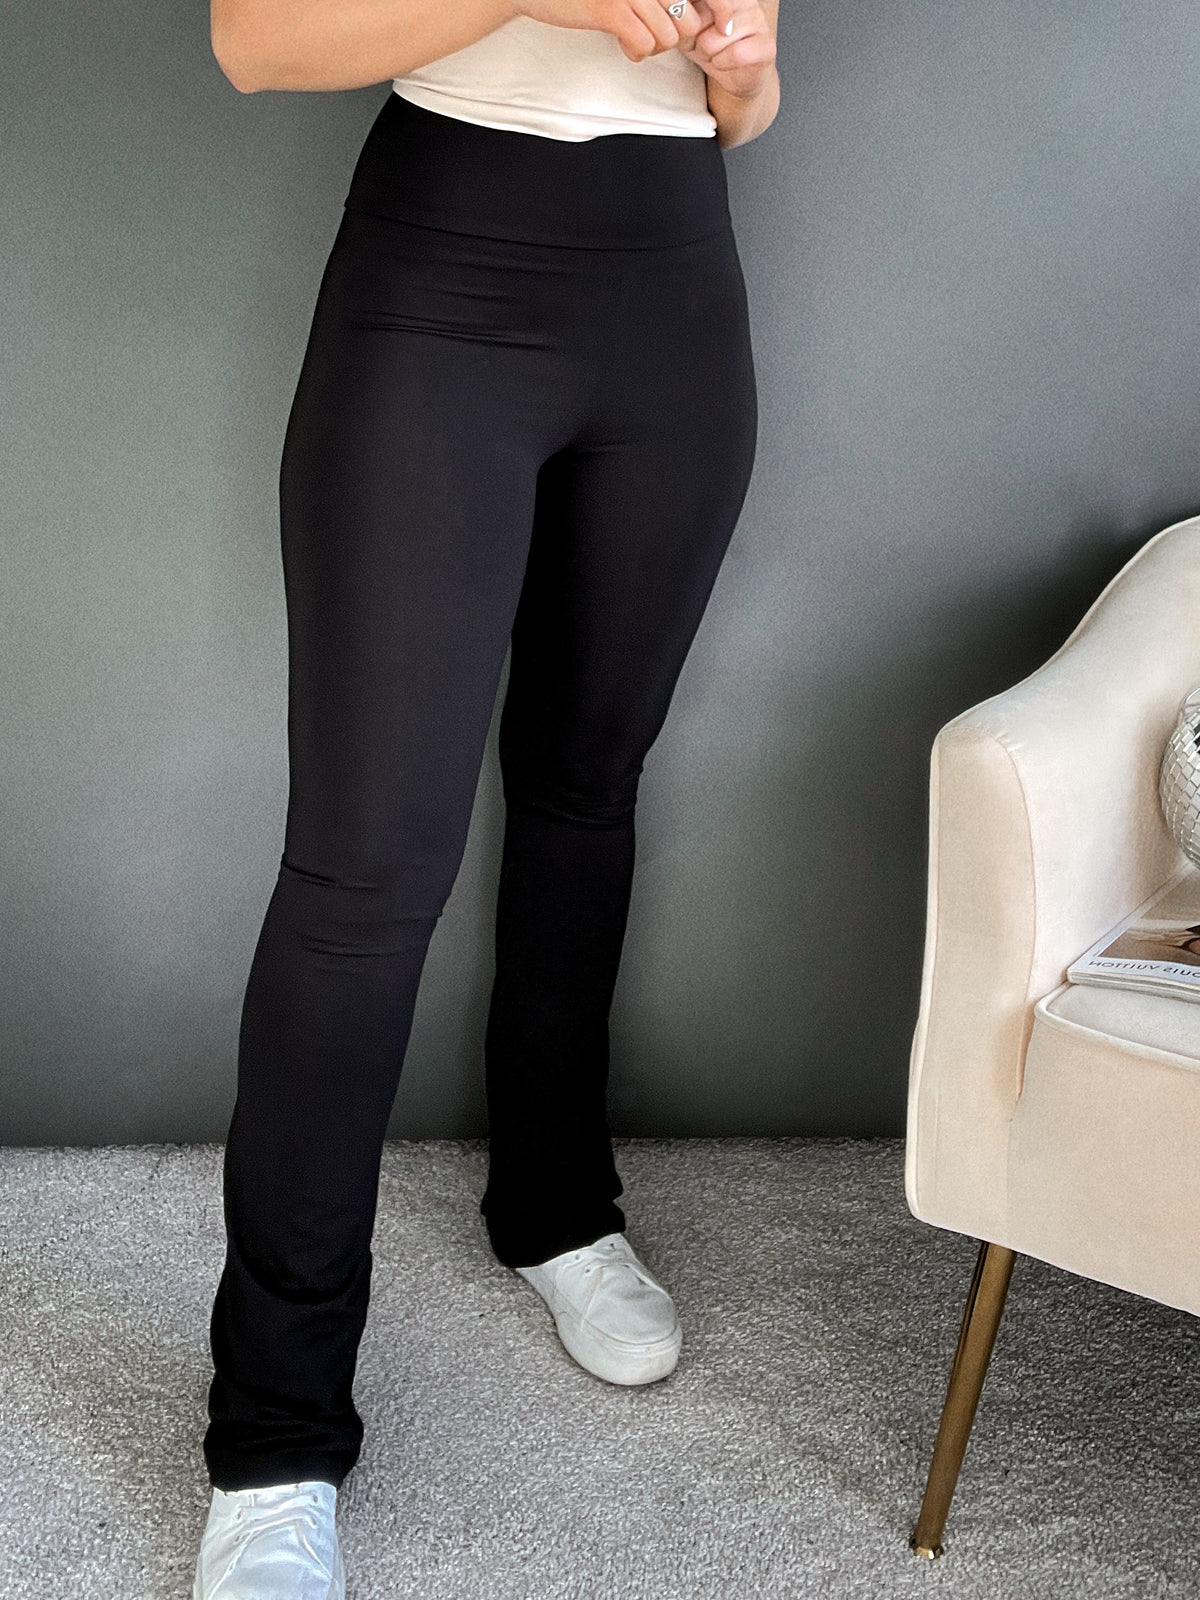 Riley GREY High Waist Faux Leather Leggings – Get That Trend